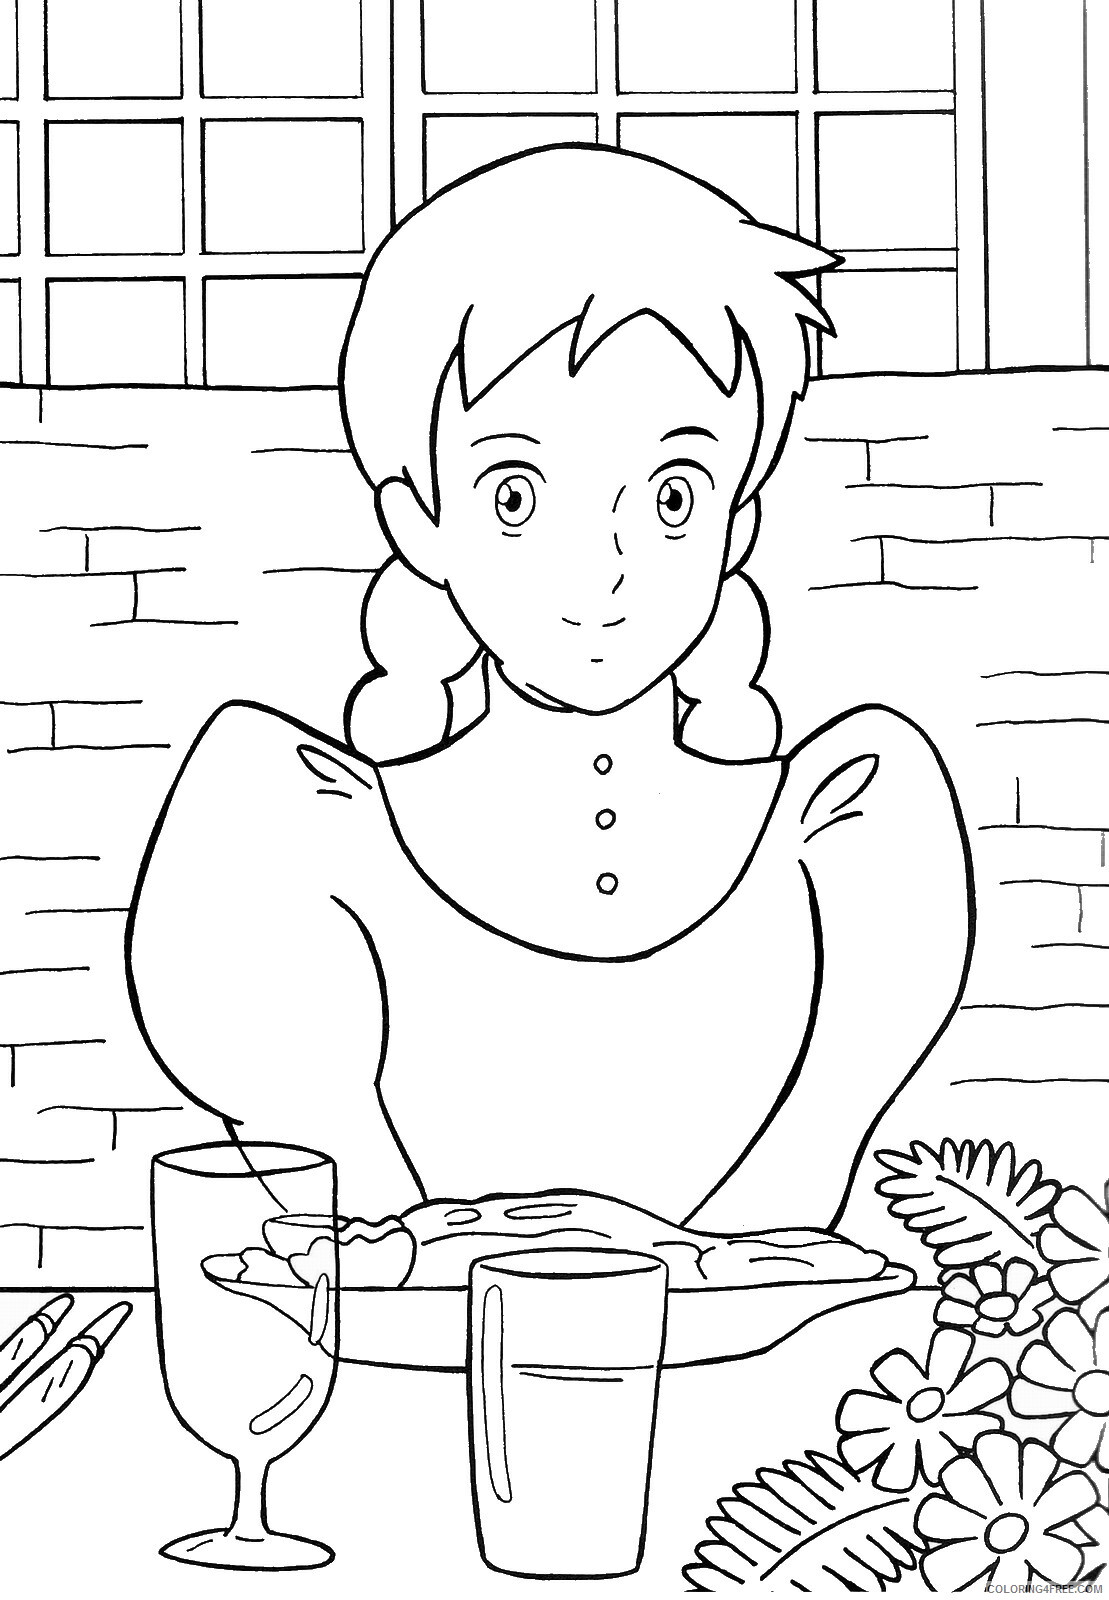 Anne of Green Gables Coloring Pages TV Film anne green gables 22 Printable 2020 00150 Coloring4free